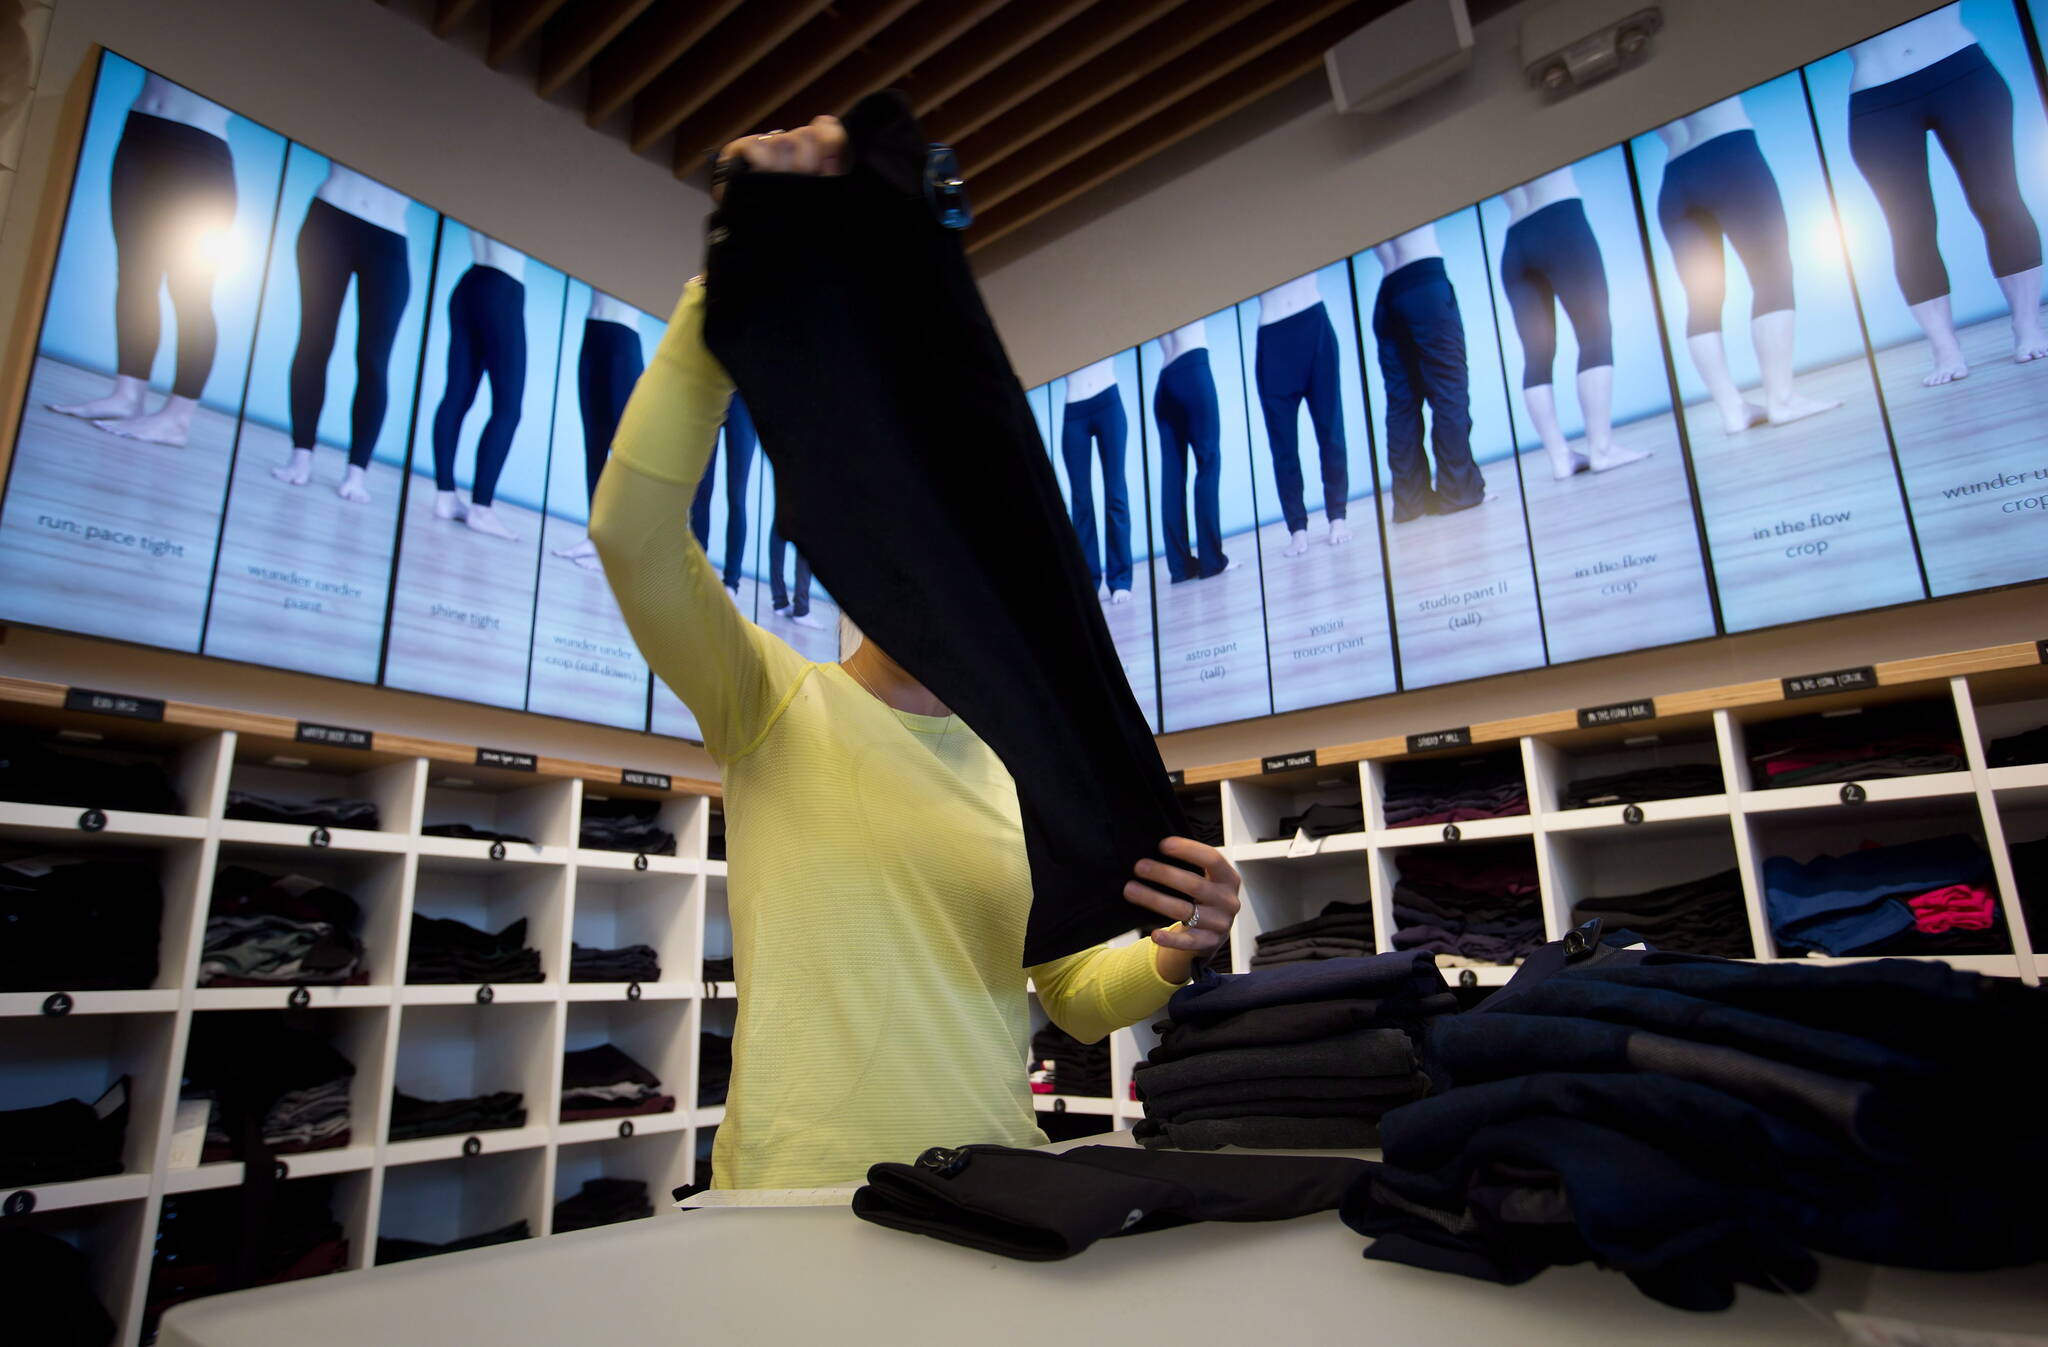 An employee folds yoga pants as the types of pants are animated and displayed on digital screens instead of mannequins at a Lululemon Athletica store in Vancouver. THE CANADIAN PRESS/Darryl Dyck